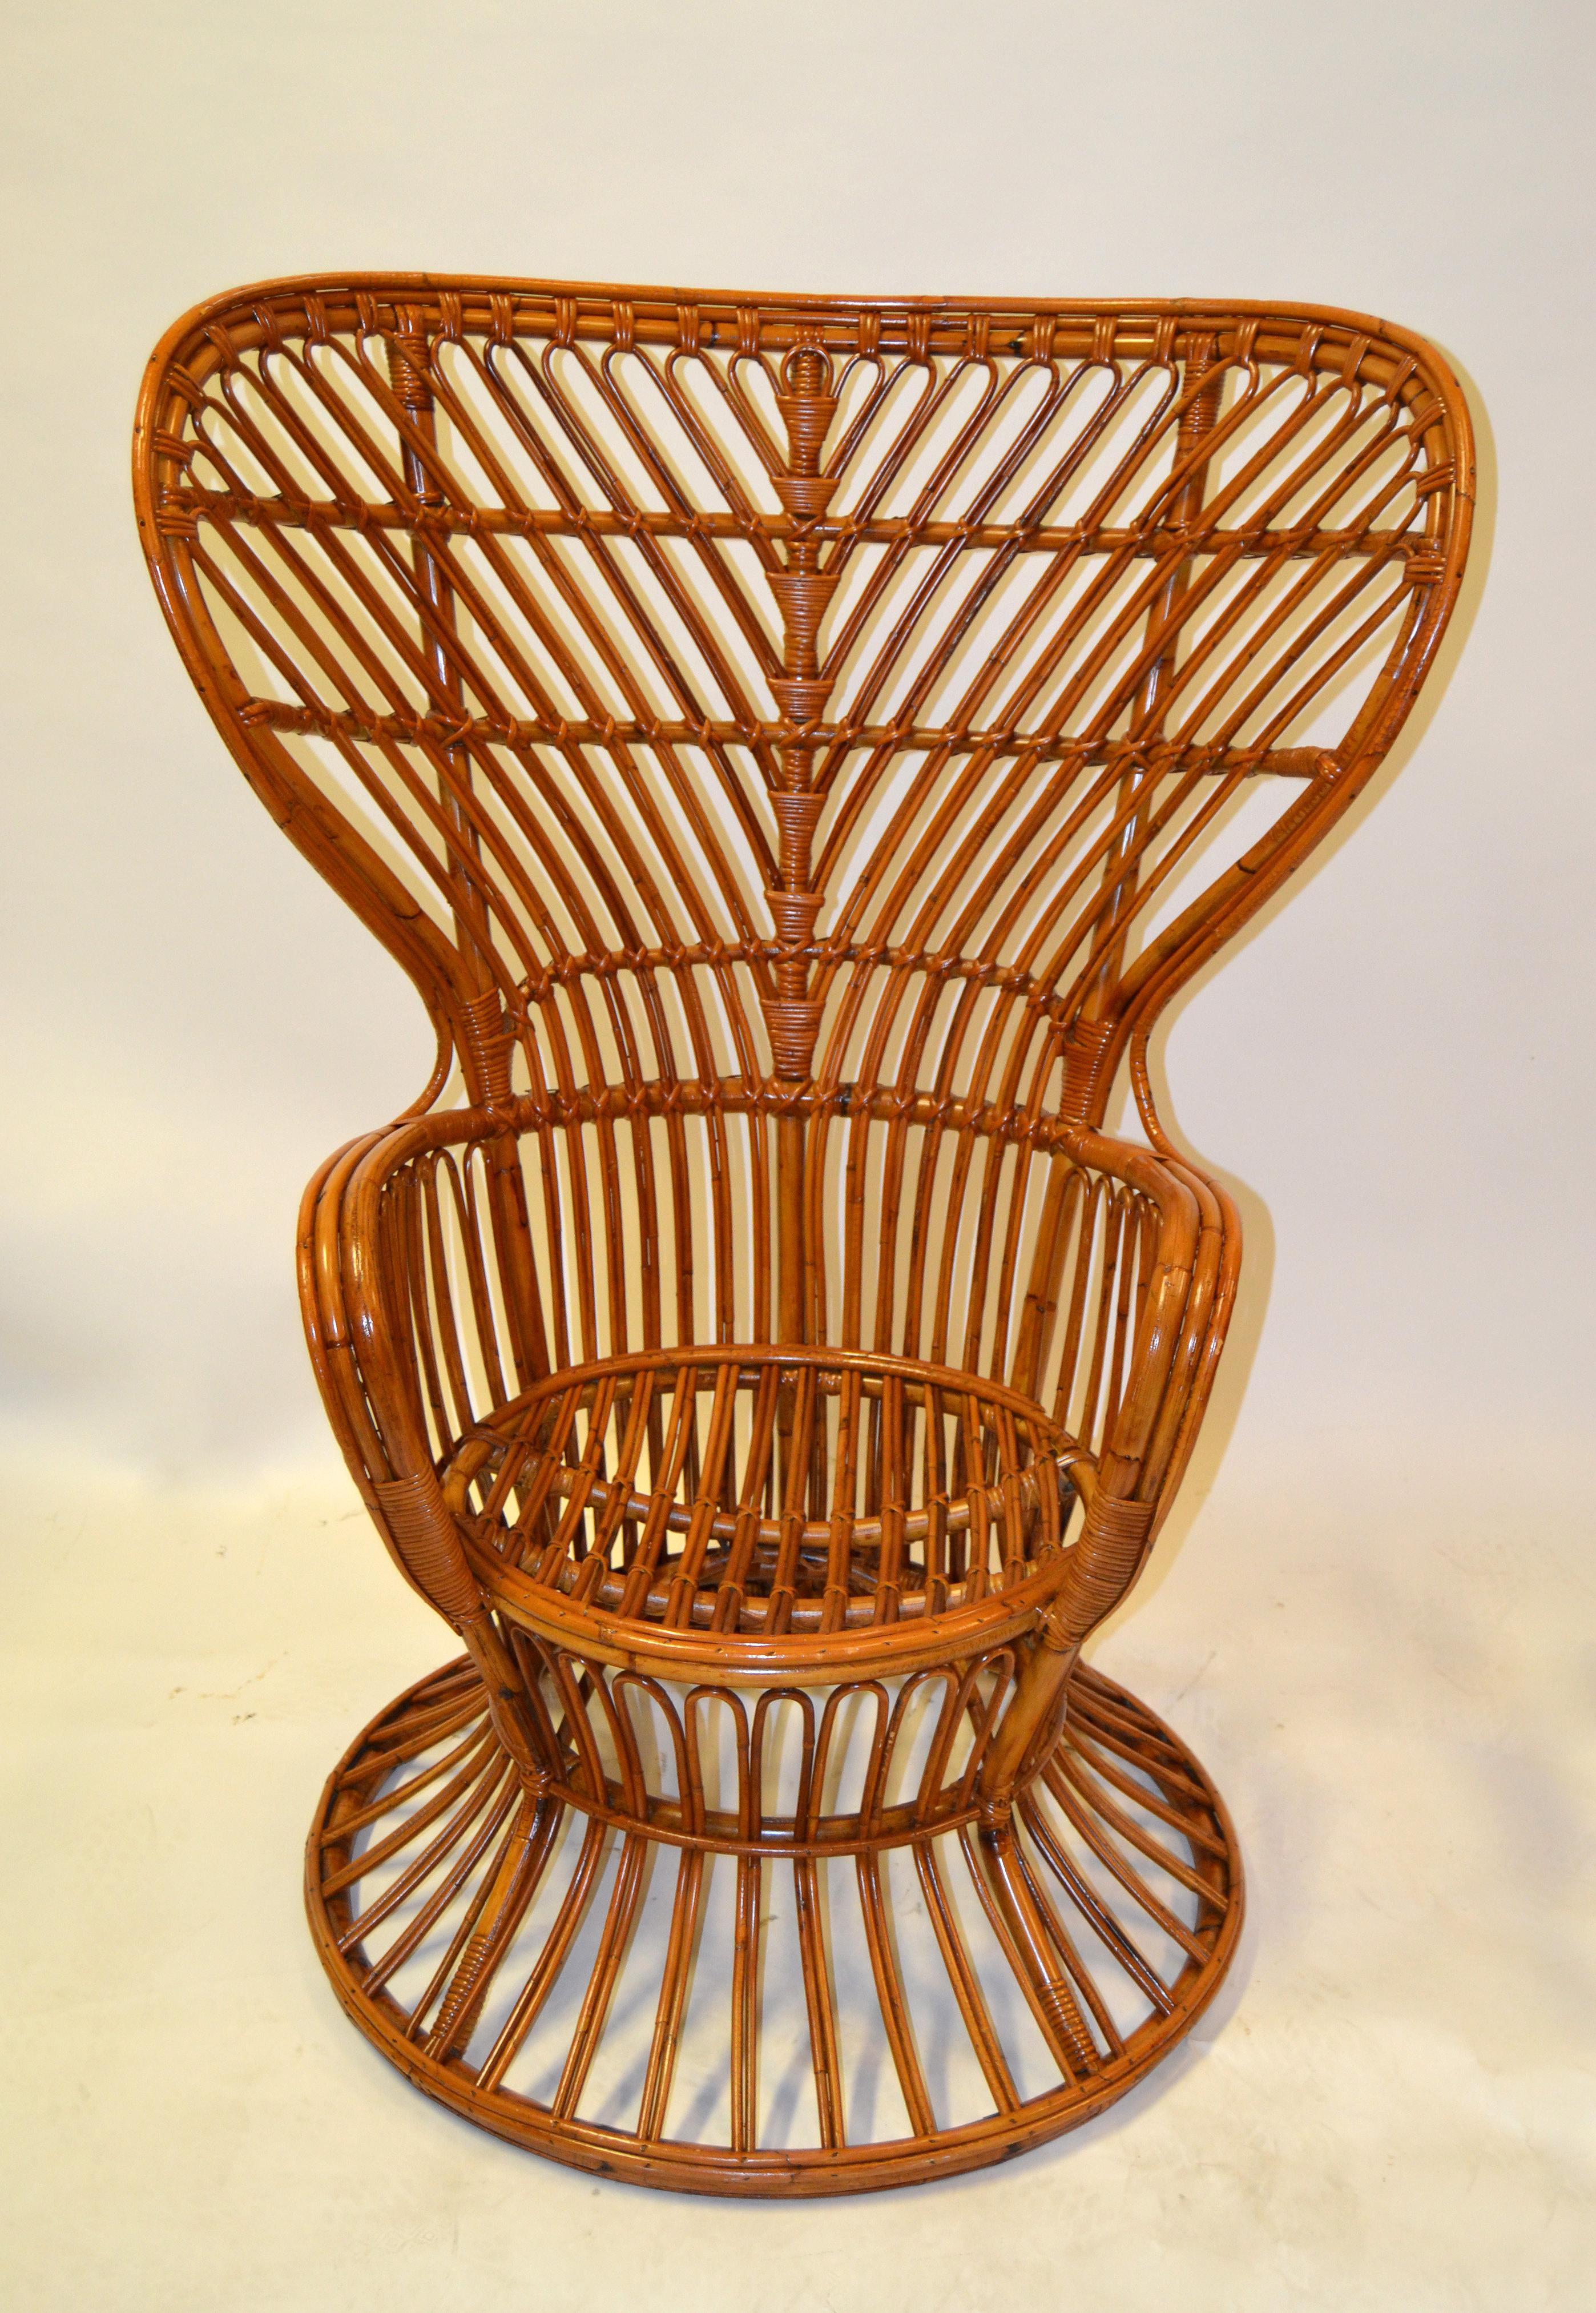 Vintage Franco Albini & Franca Helg style round handwoven rattan, wicker high back chair.
Exemplary construction, woven ties are firmly linked.
An iconic design Classic made in Italy.